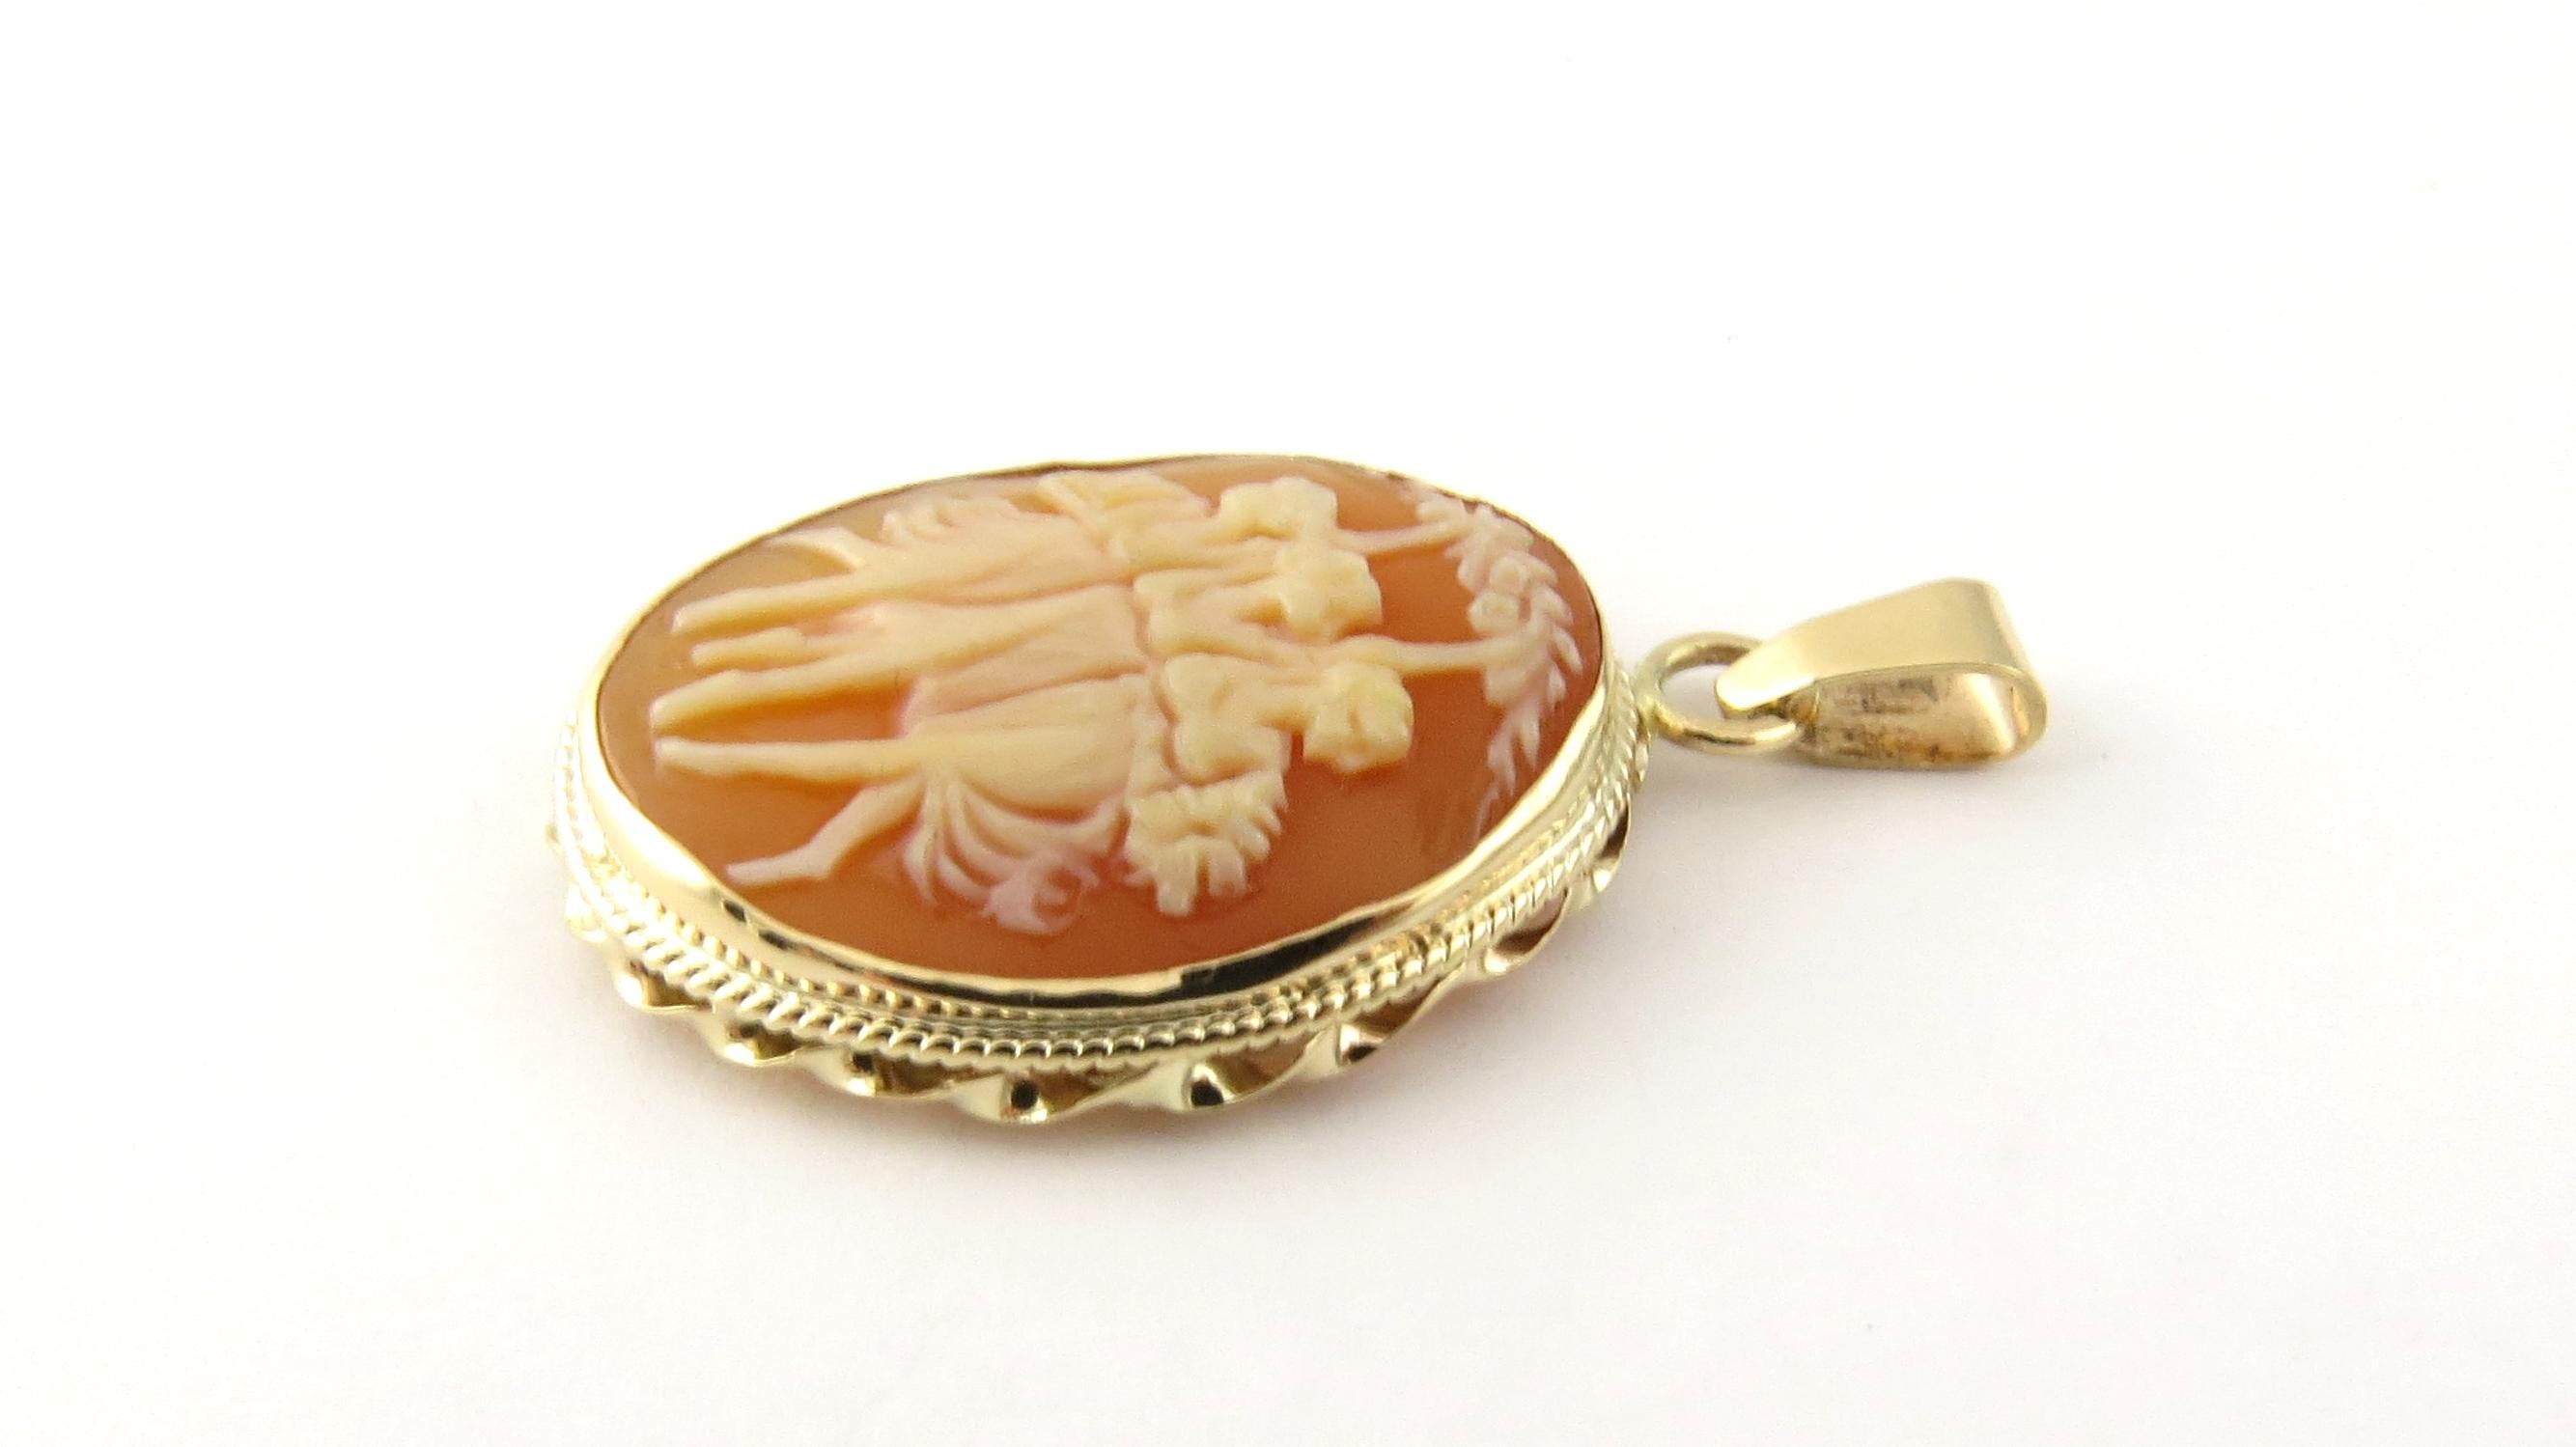 Vintage 14 Karat Yellow Gold Cameo Pendant

This classic cameo pendant features three lovely ladies holding their parasols framed in beautifully detailed 14K yellow gold.

Size: 33 mm x 22 mm

Weight: 3.1 dwt. / 4.9 gr.

Acid tested for 14K